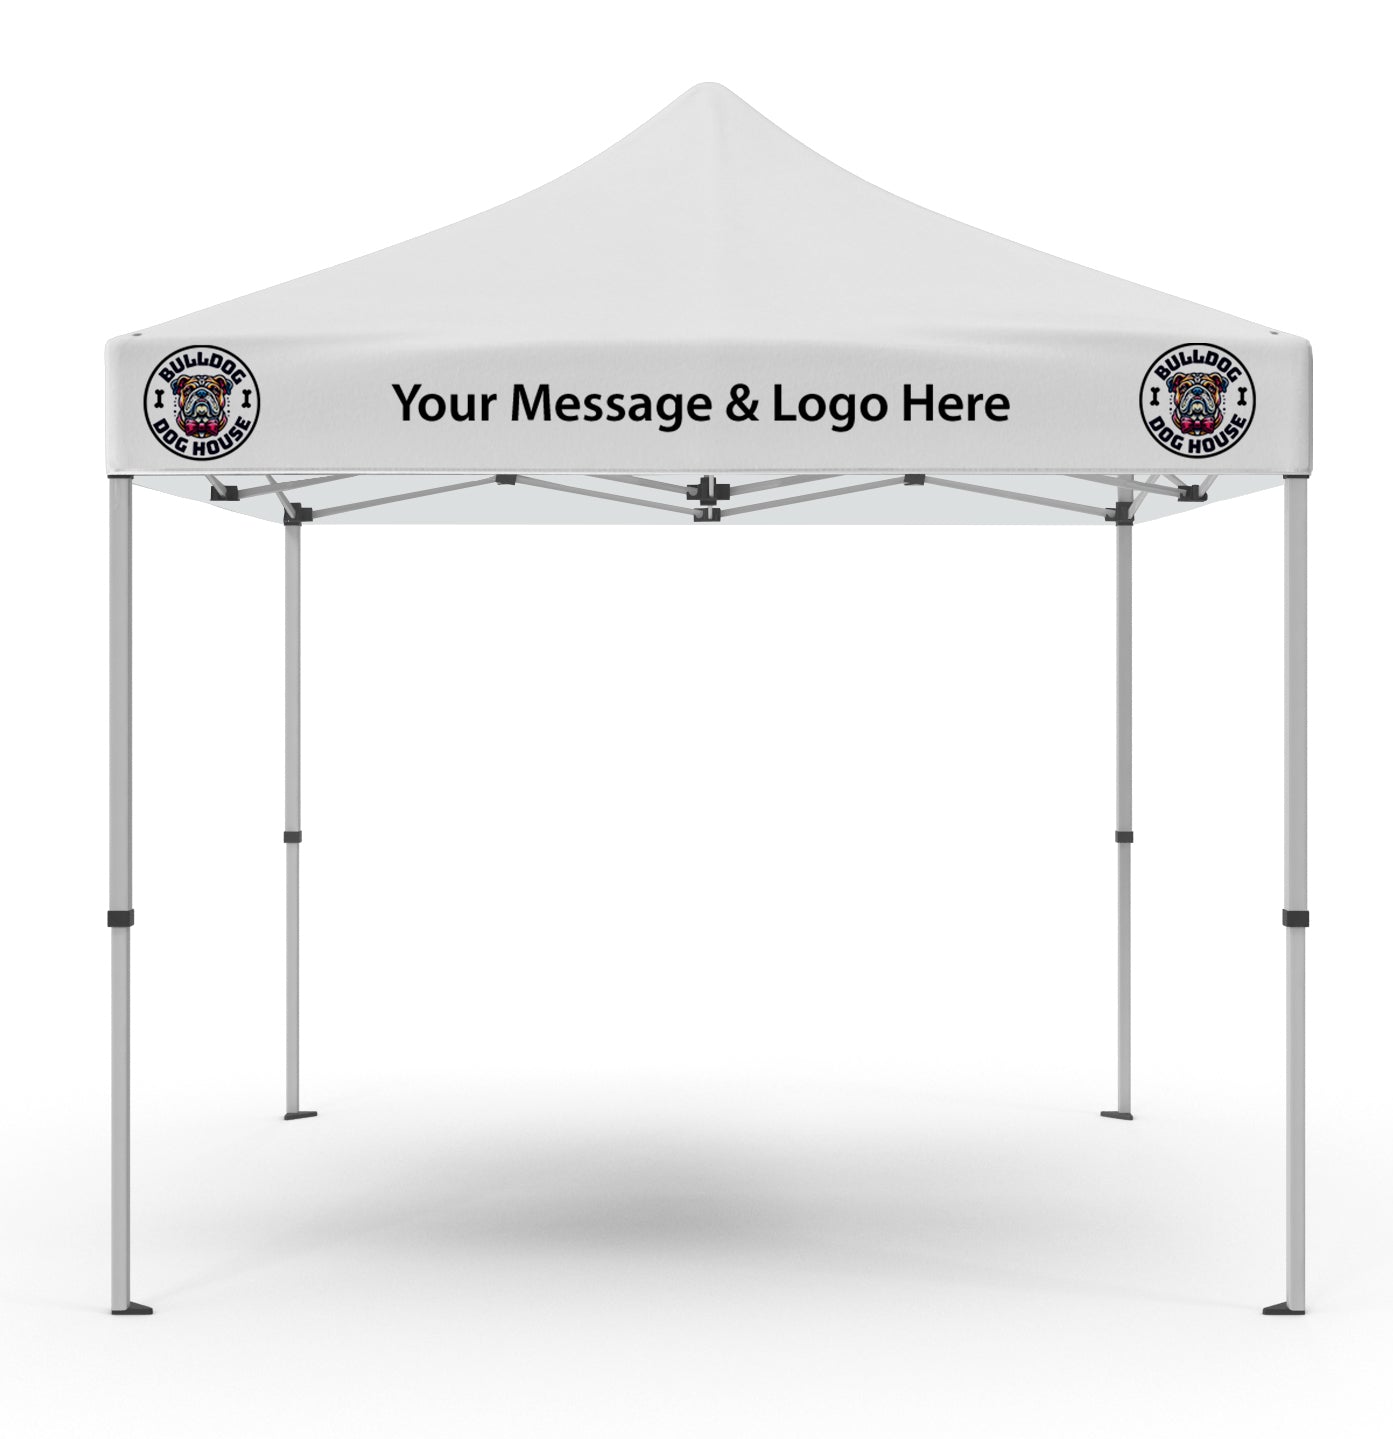 Canopy Message & Logo Added to your existing Popup display tent Full Color